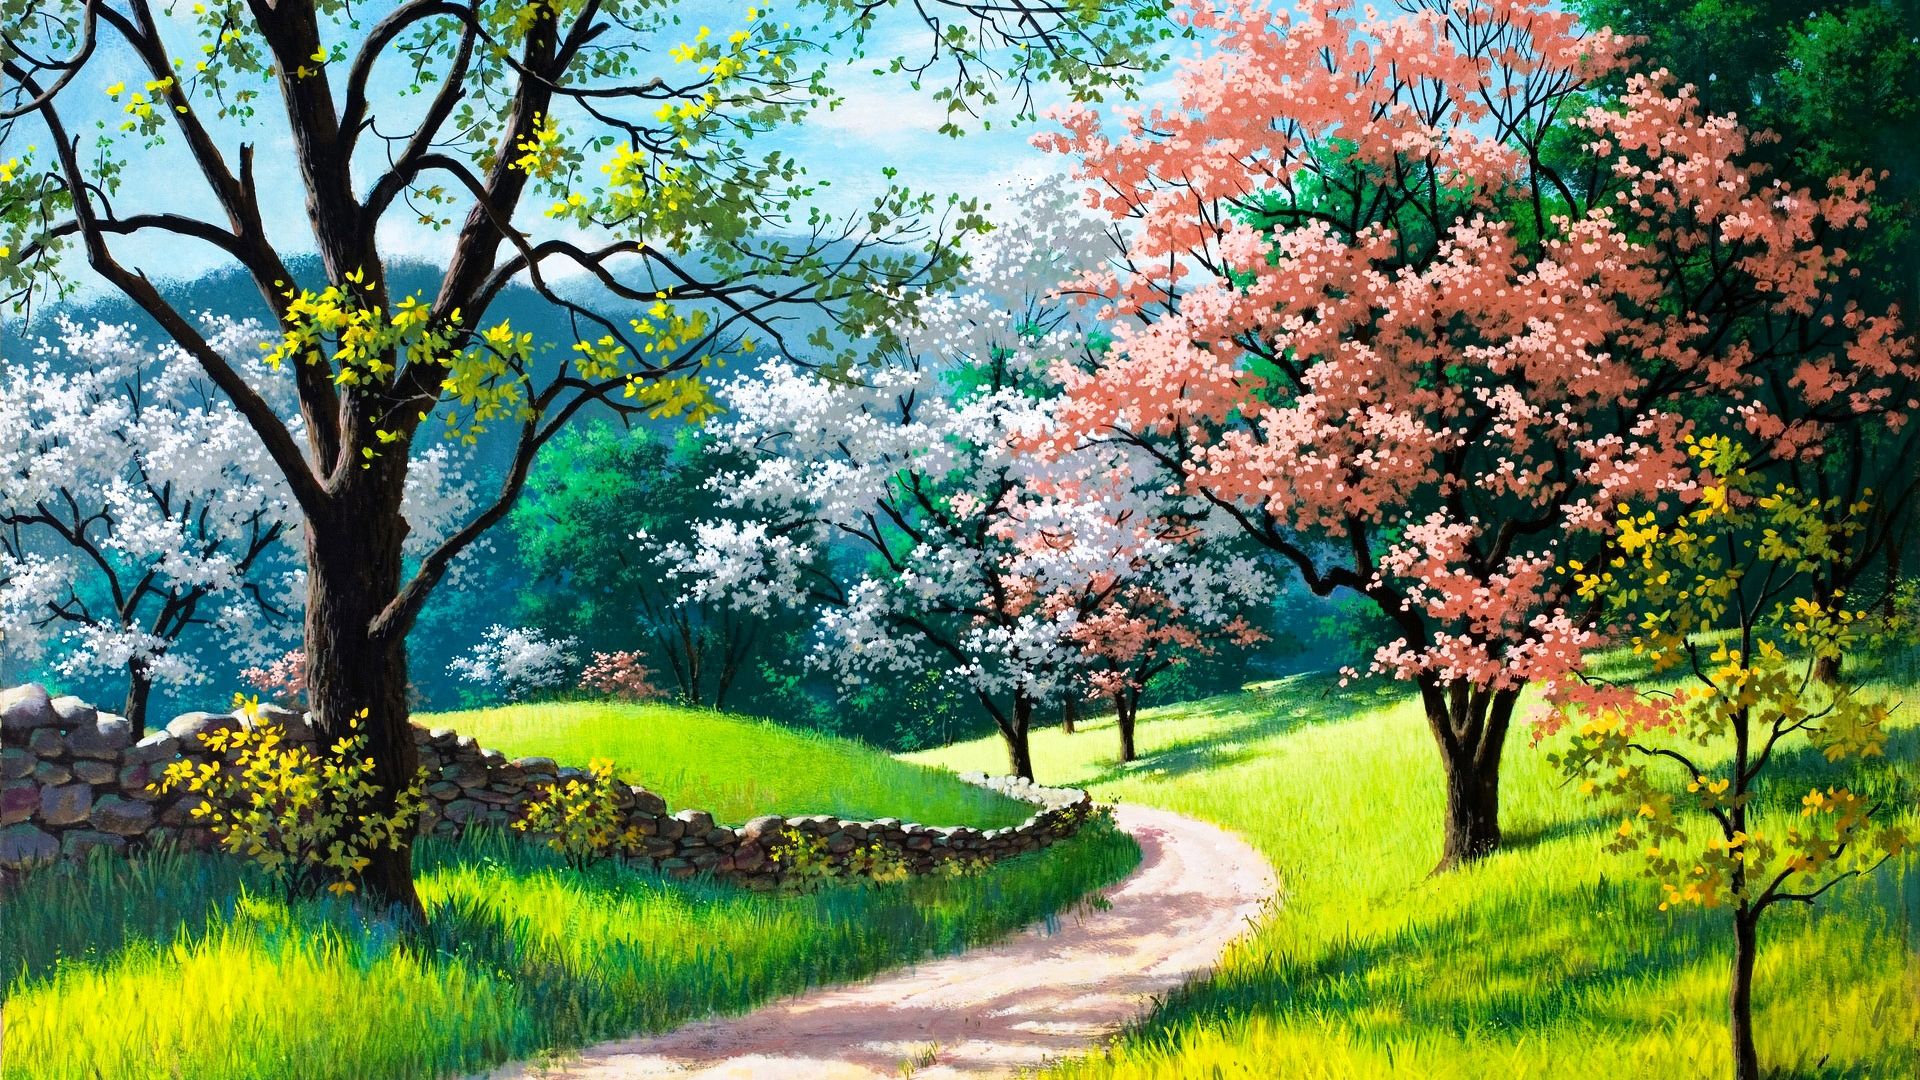 Desktop Wallpaper Spring Nature Painting Trees Grass Road, Hd Image,  Picture, Background, 4ispou